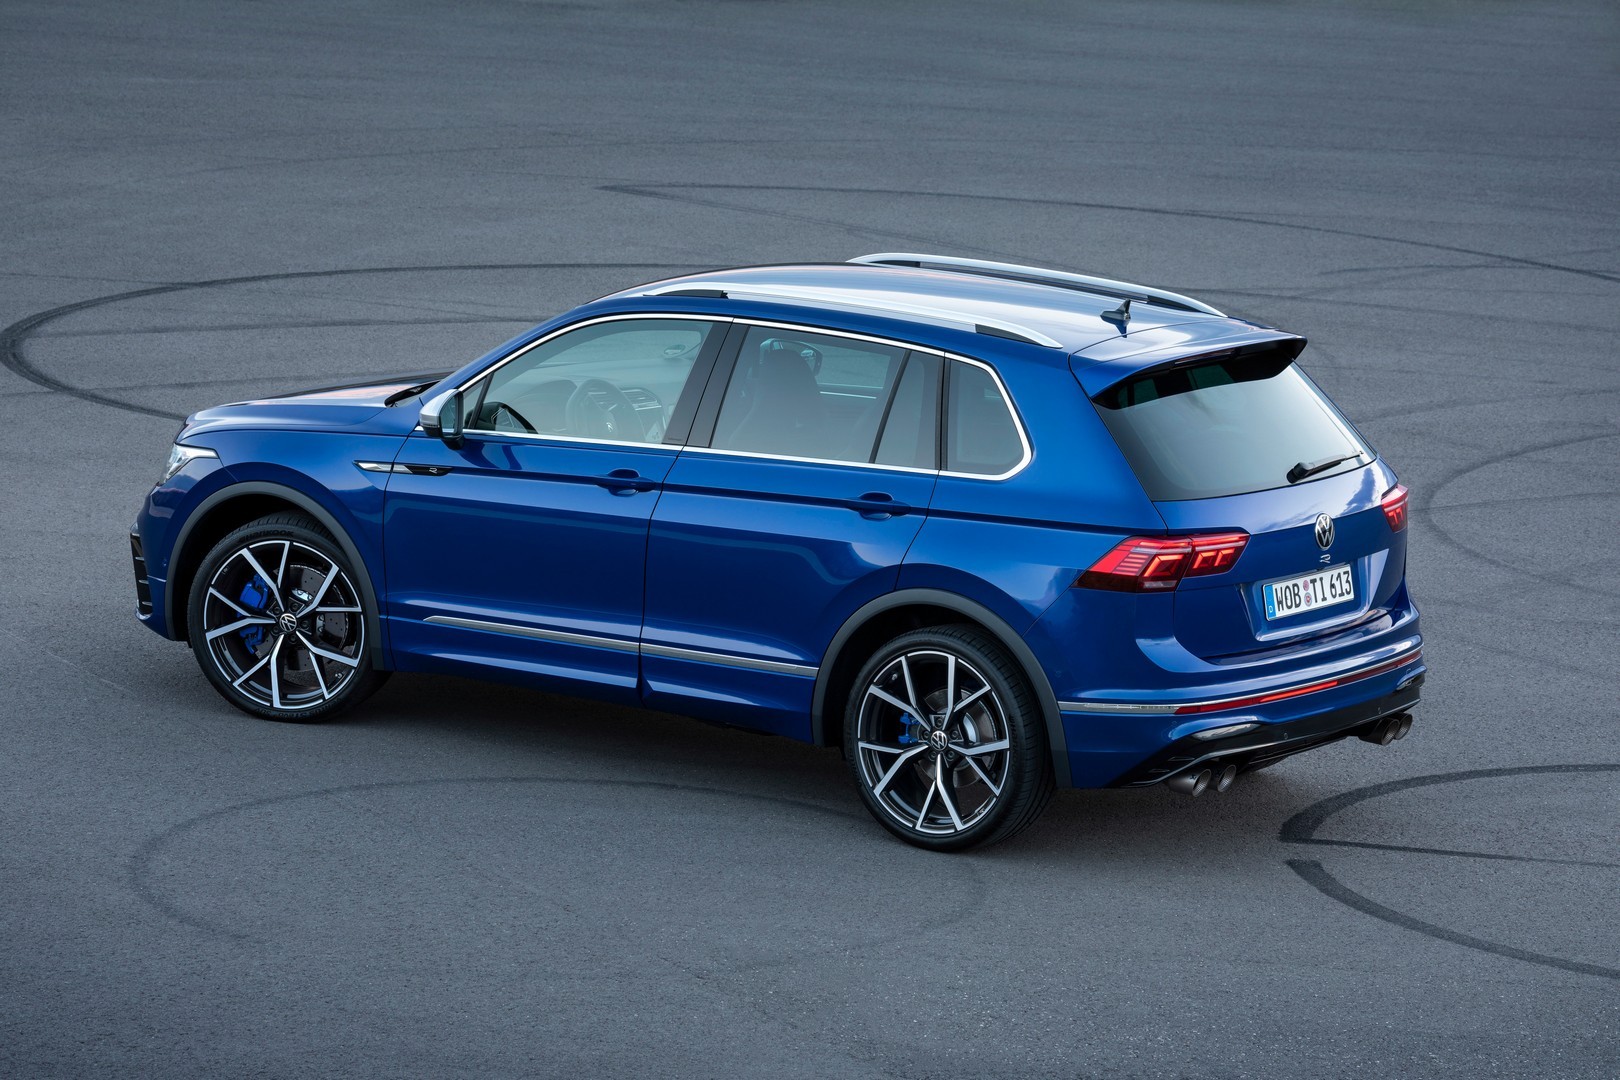 2021 VW Tiguan R Takes Golf R Performance to the SUV Side for Almost €